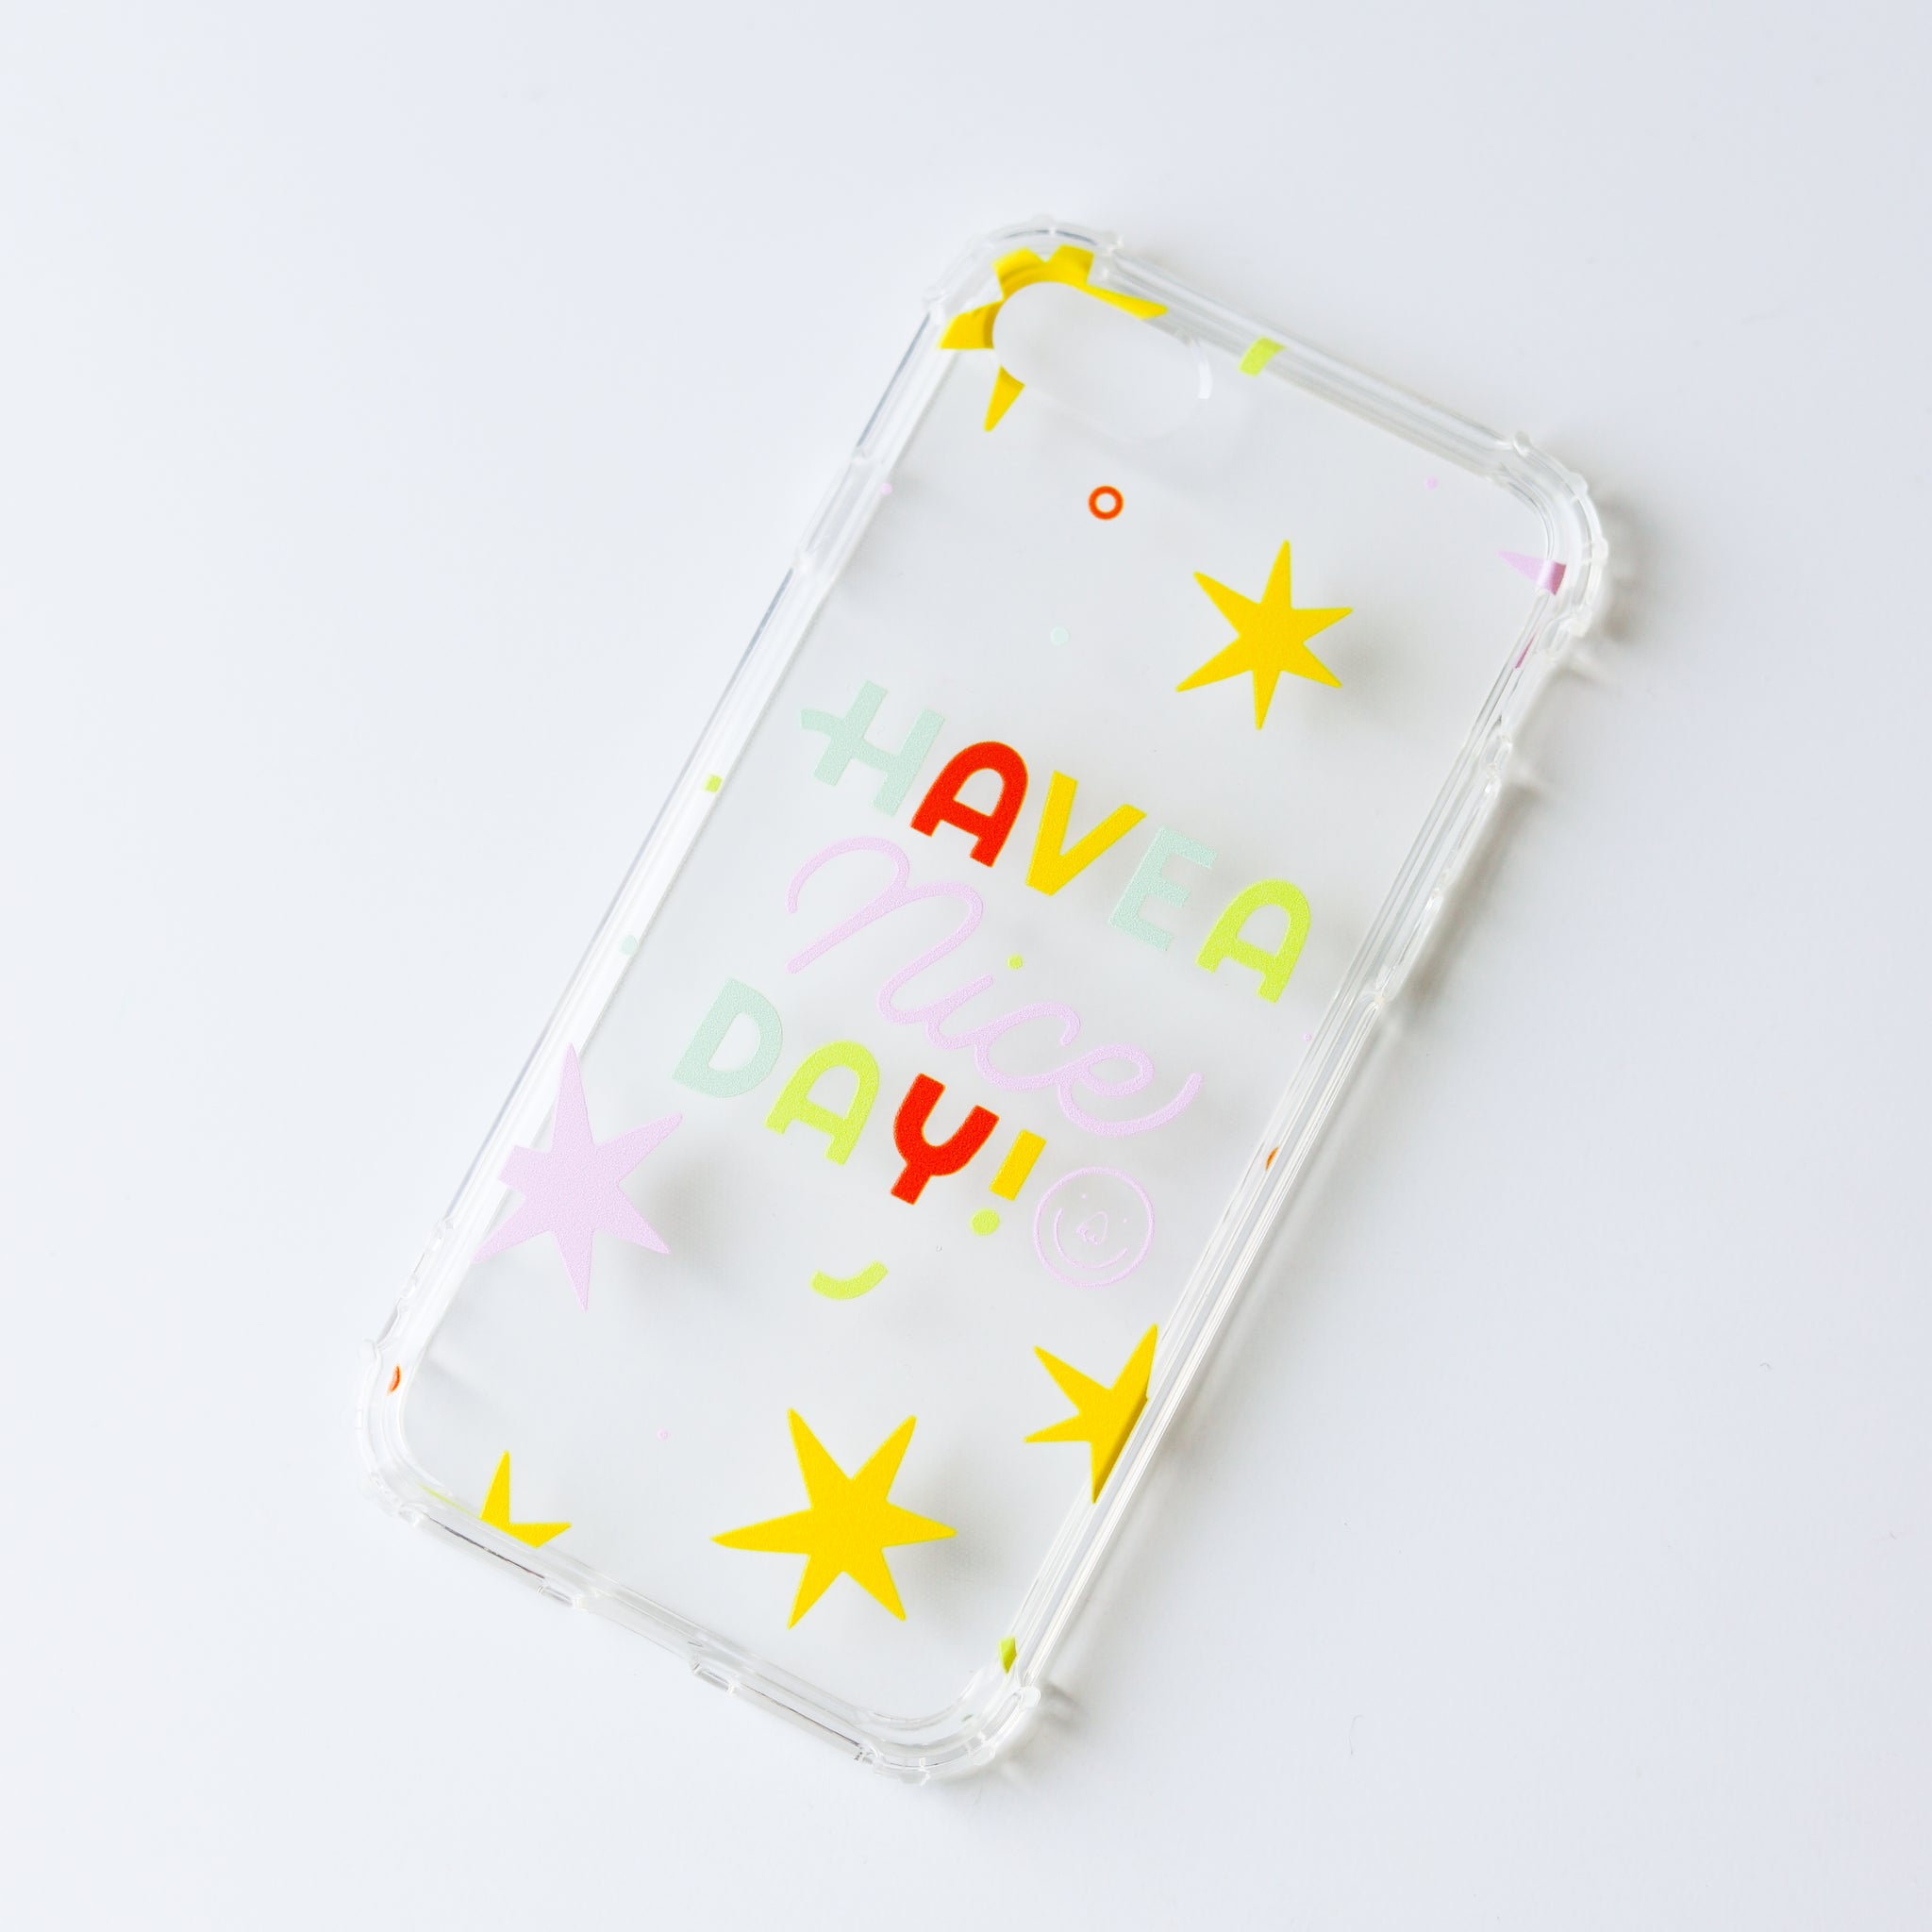 Stunning Phone Case for a Perfect Day